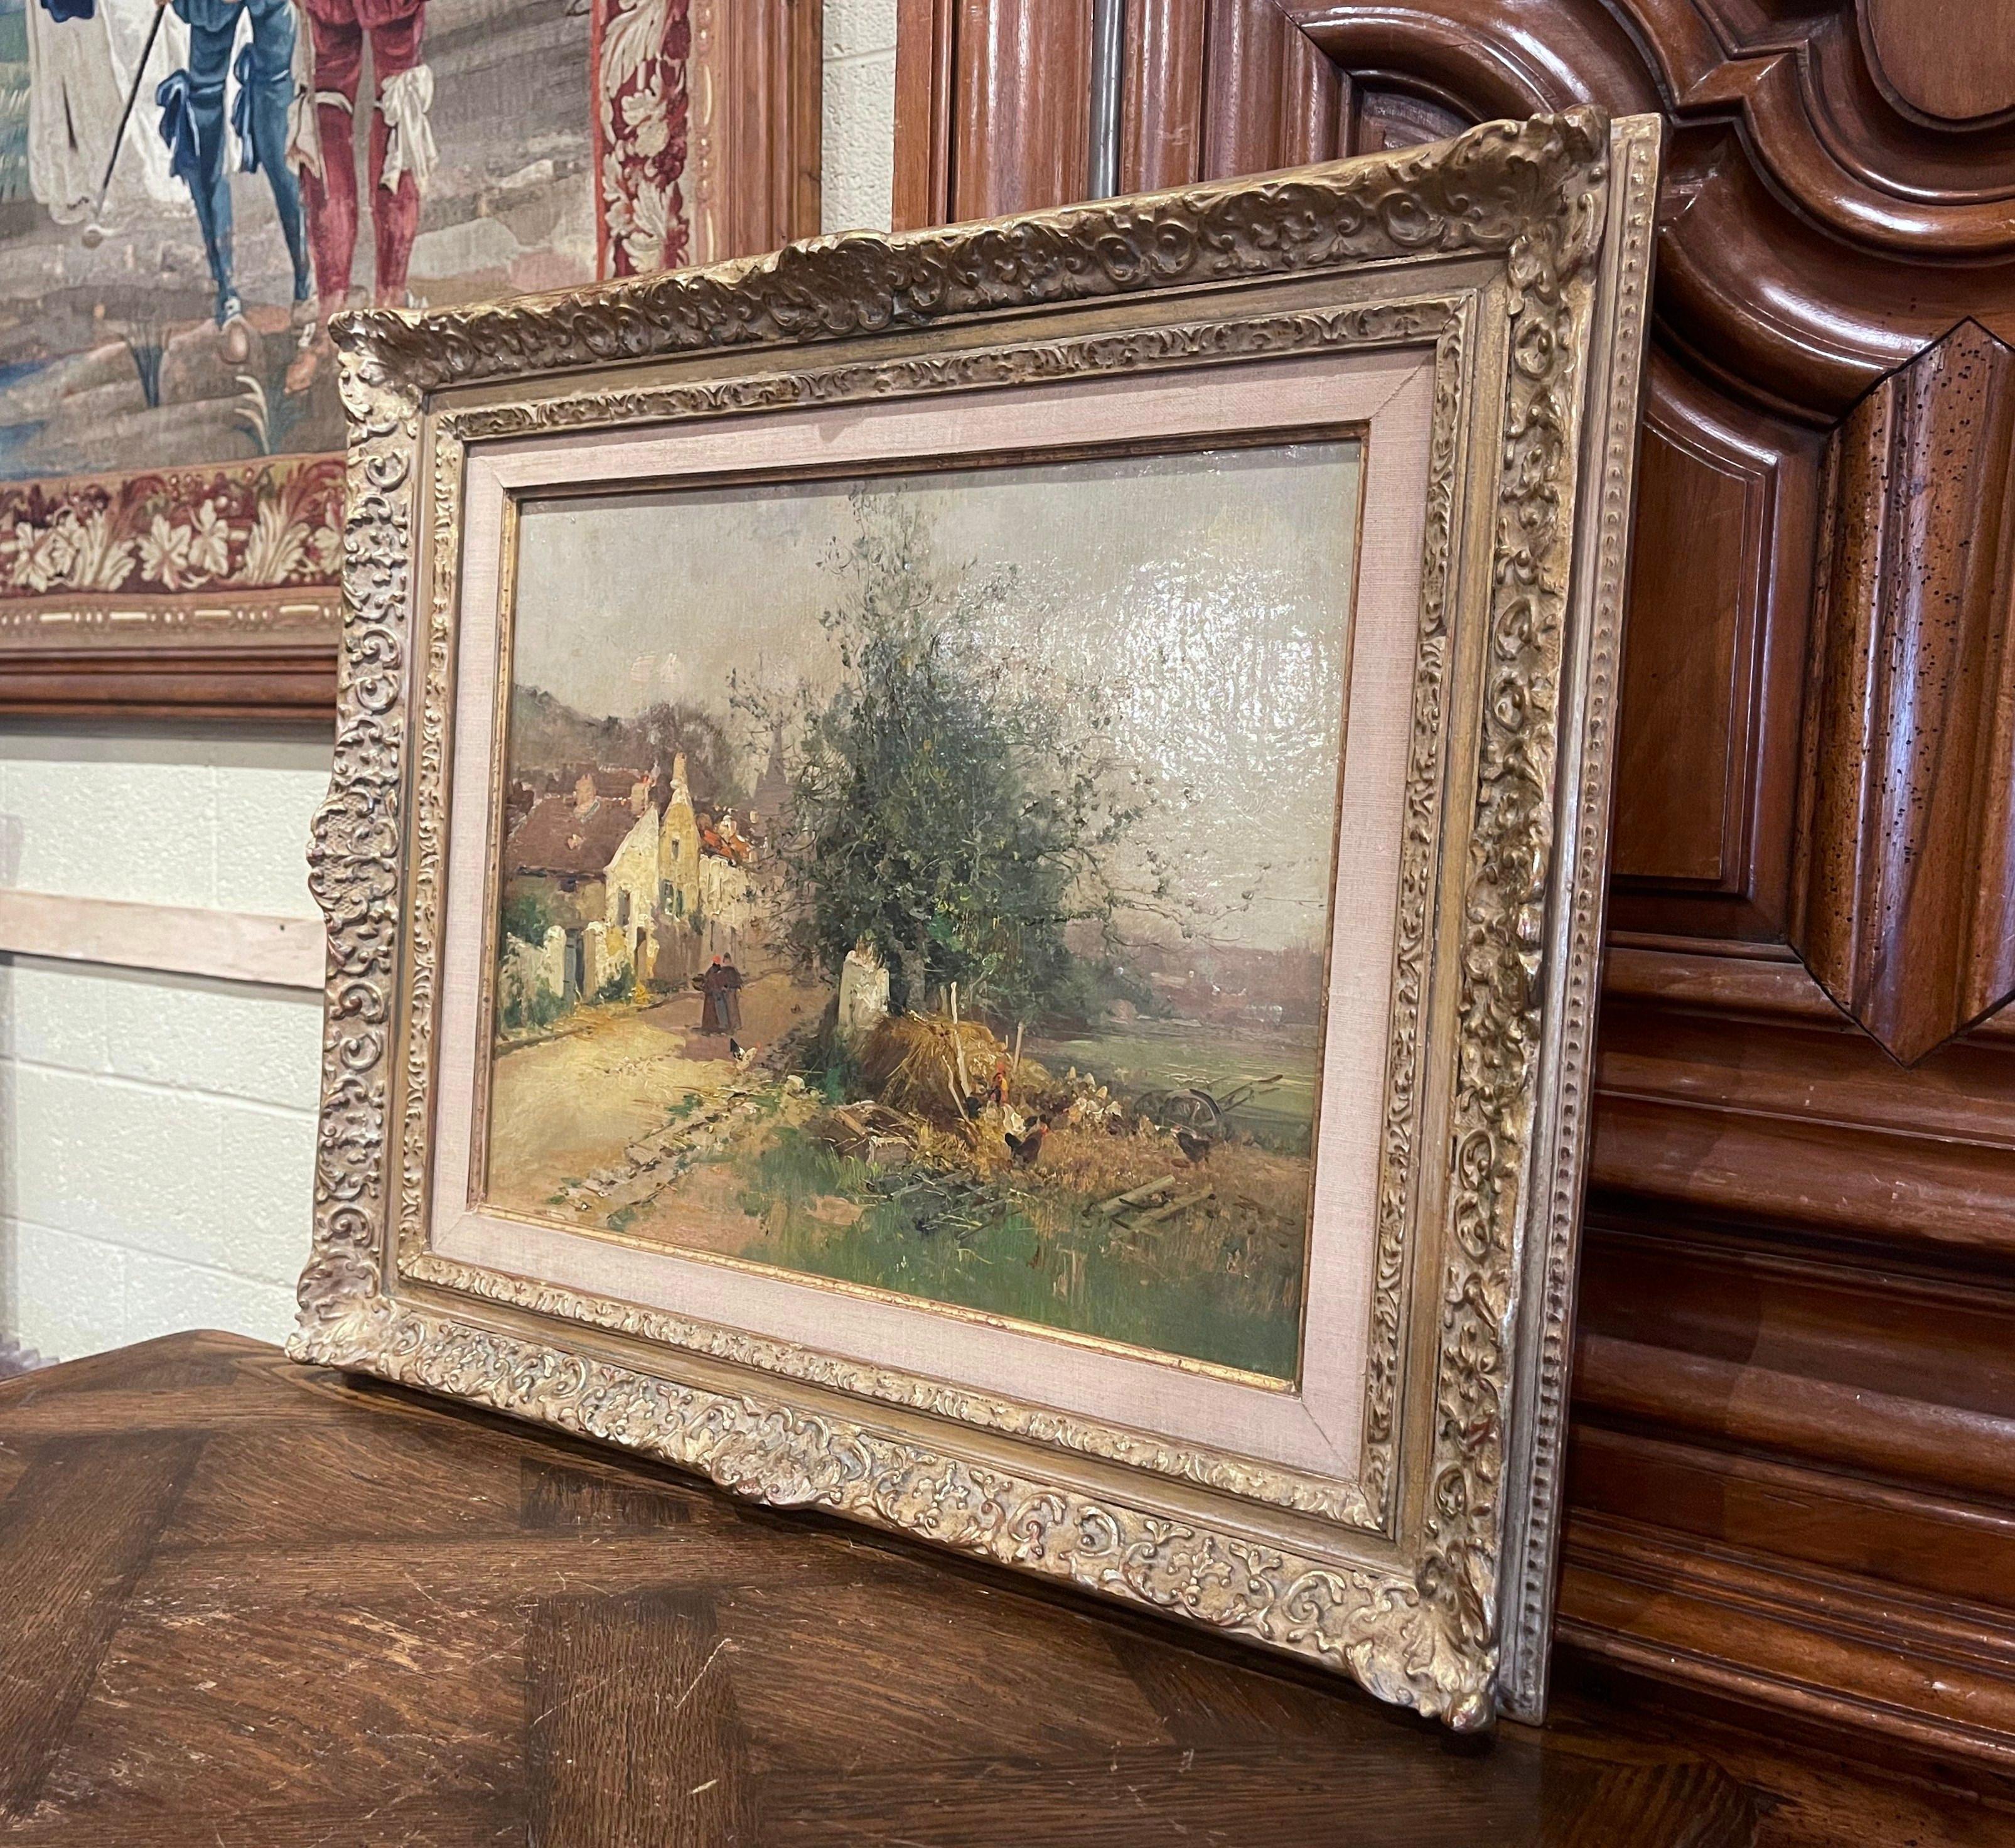 This 19th century impressionist painting was crafted in France, circa 1890. Set in a carved giltwood frame, the artwork painted on canvas, illustrates a picturesque, countryside landscape scene with people, chickens, a village and its road in the